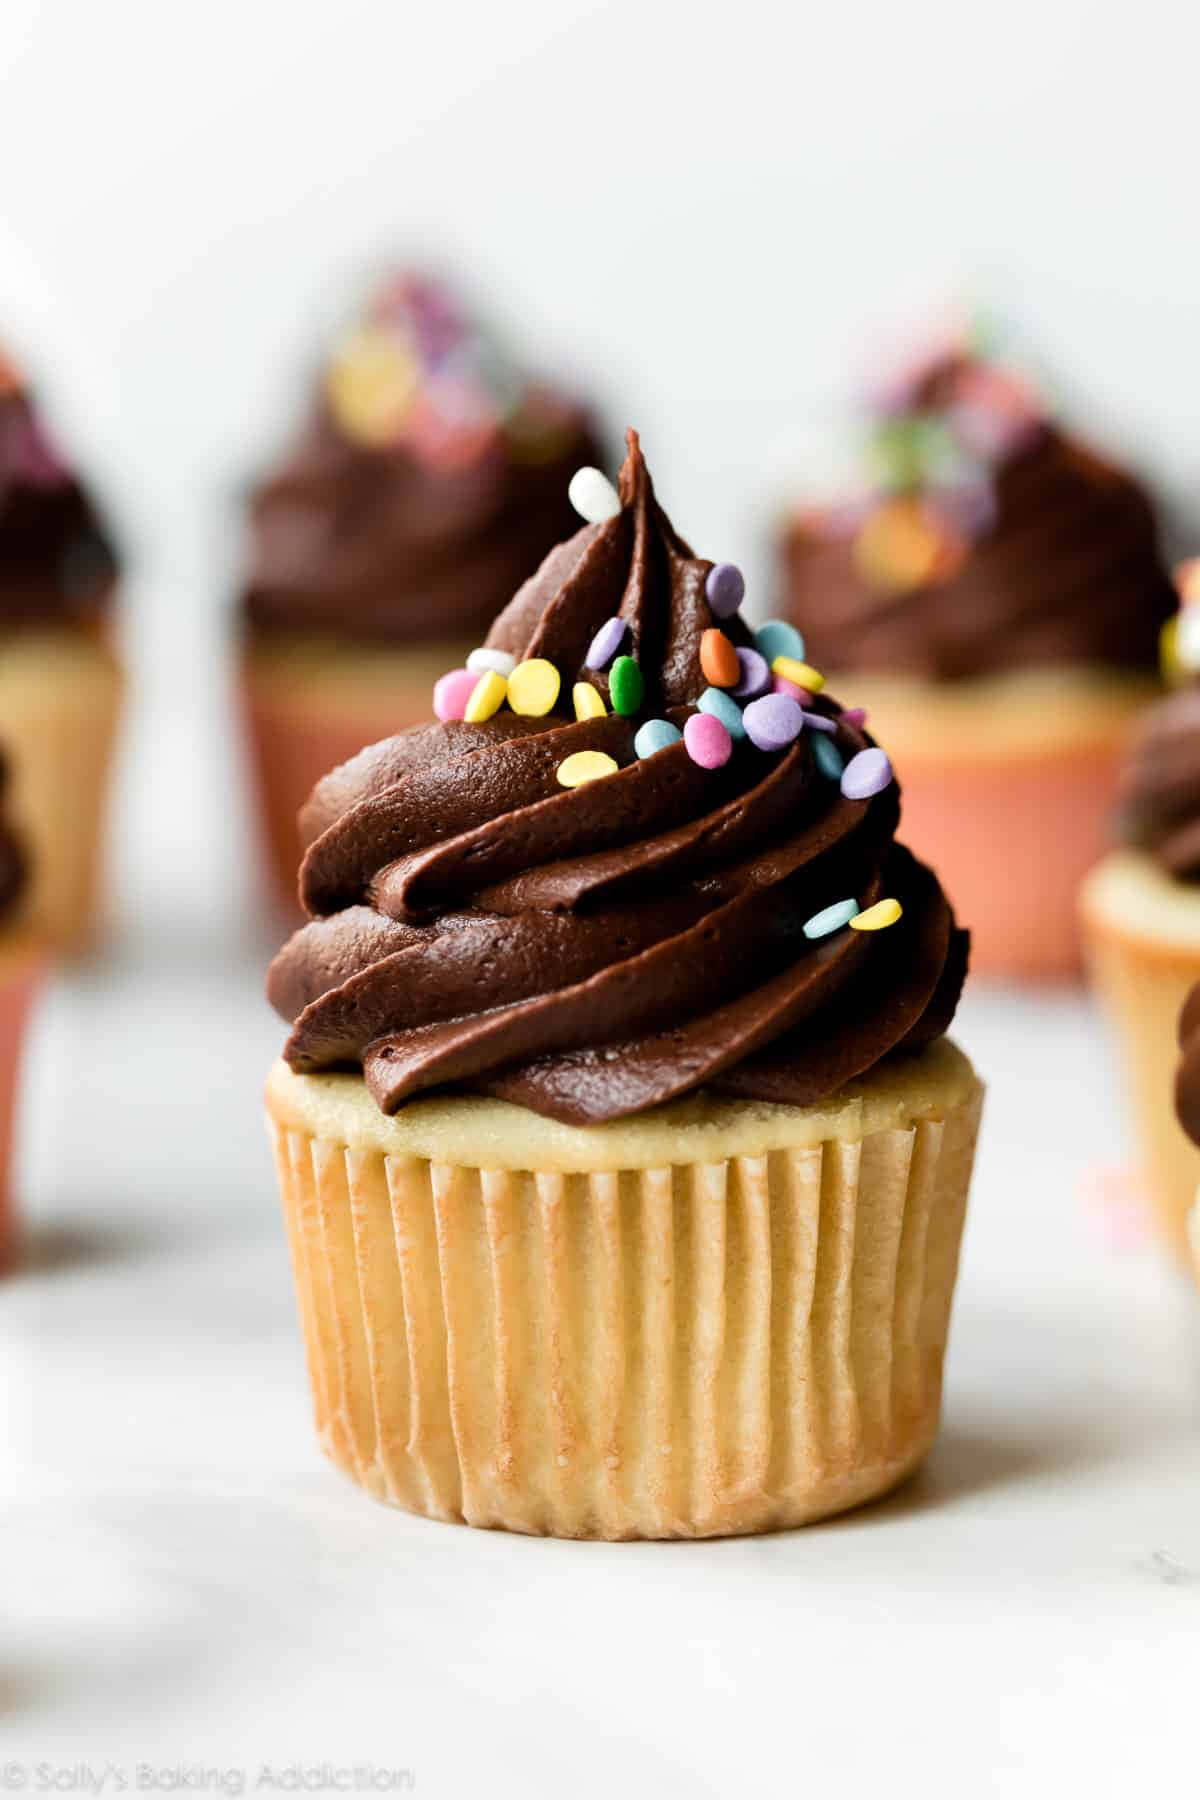 "Satisfy your sweet tooth with this delicious cupcake!"